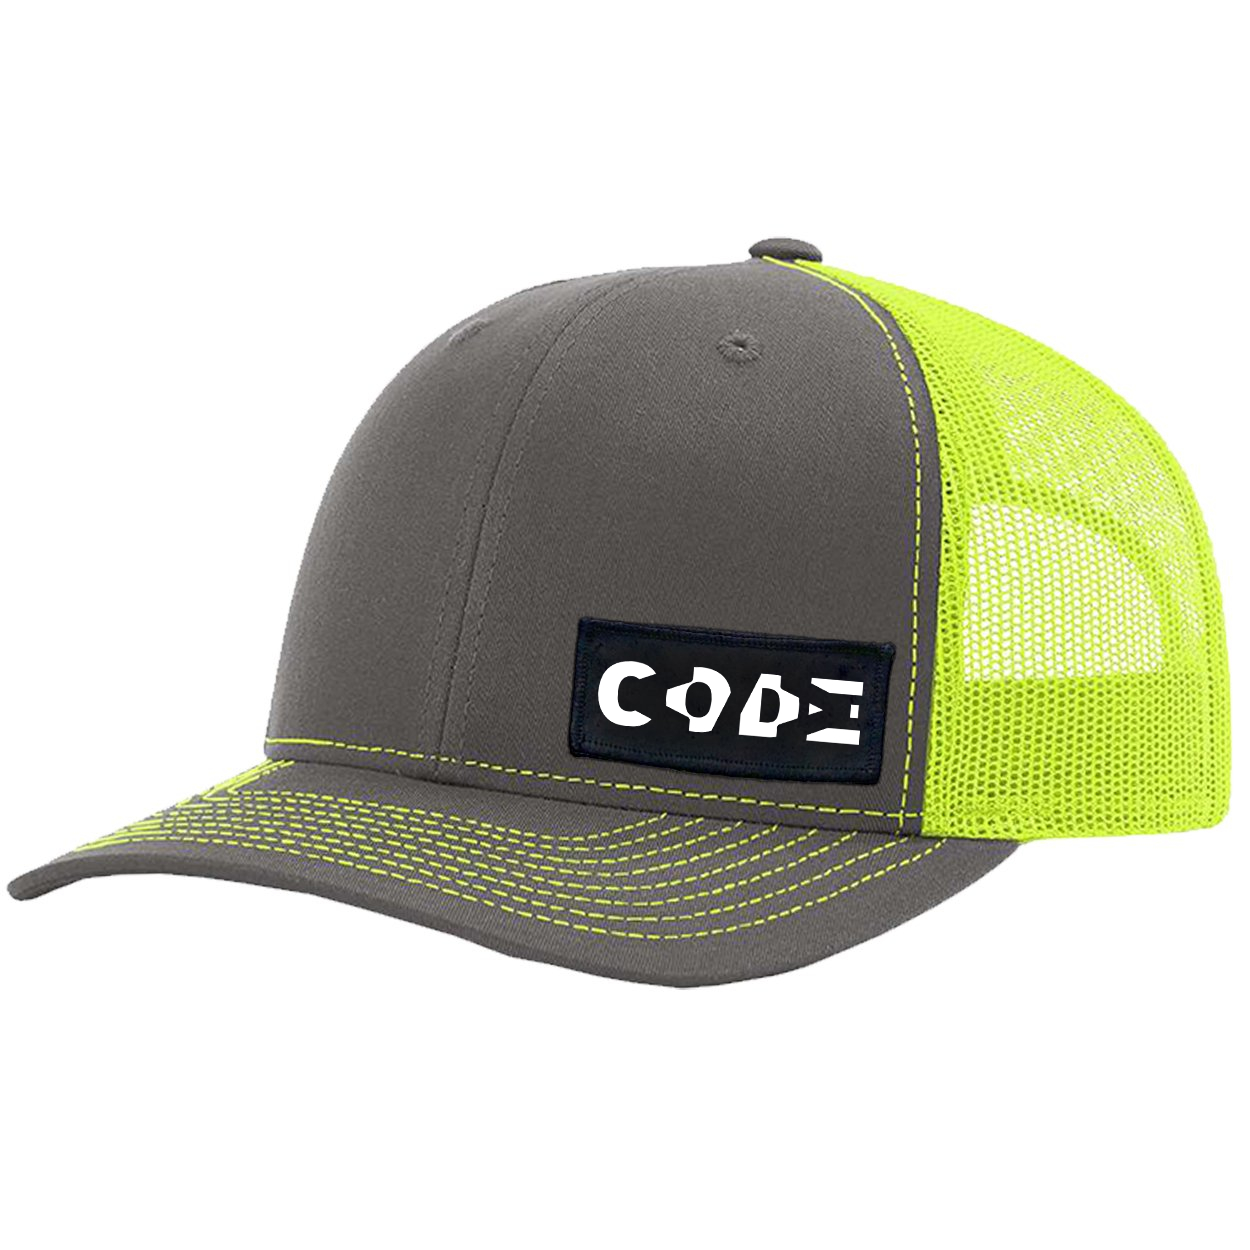 Code Tag Logo Night Out Woven Patch Snapback Trucker Hat Gray/Neon Yellow (White Logo)